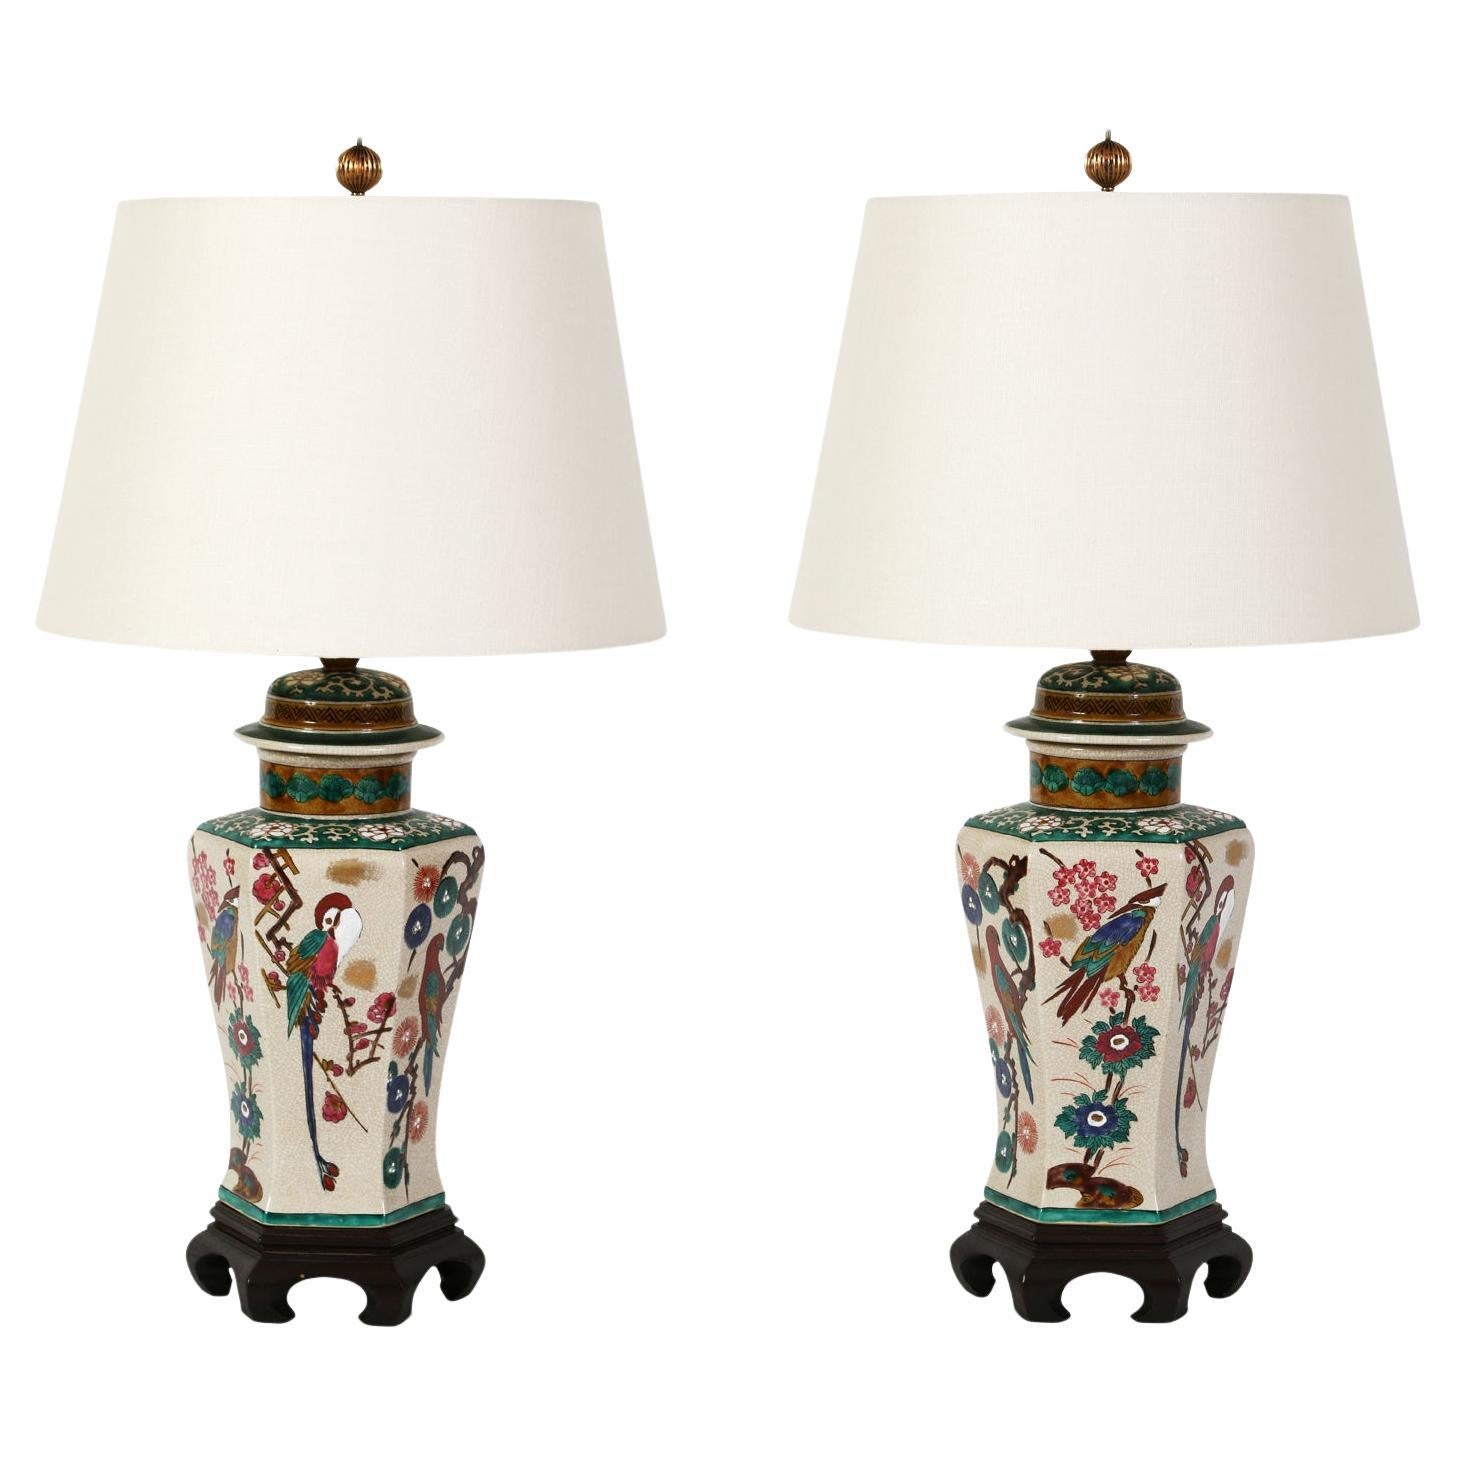 A Pair of Chinoiserie Ceramic Lamps